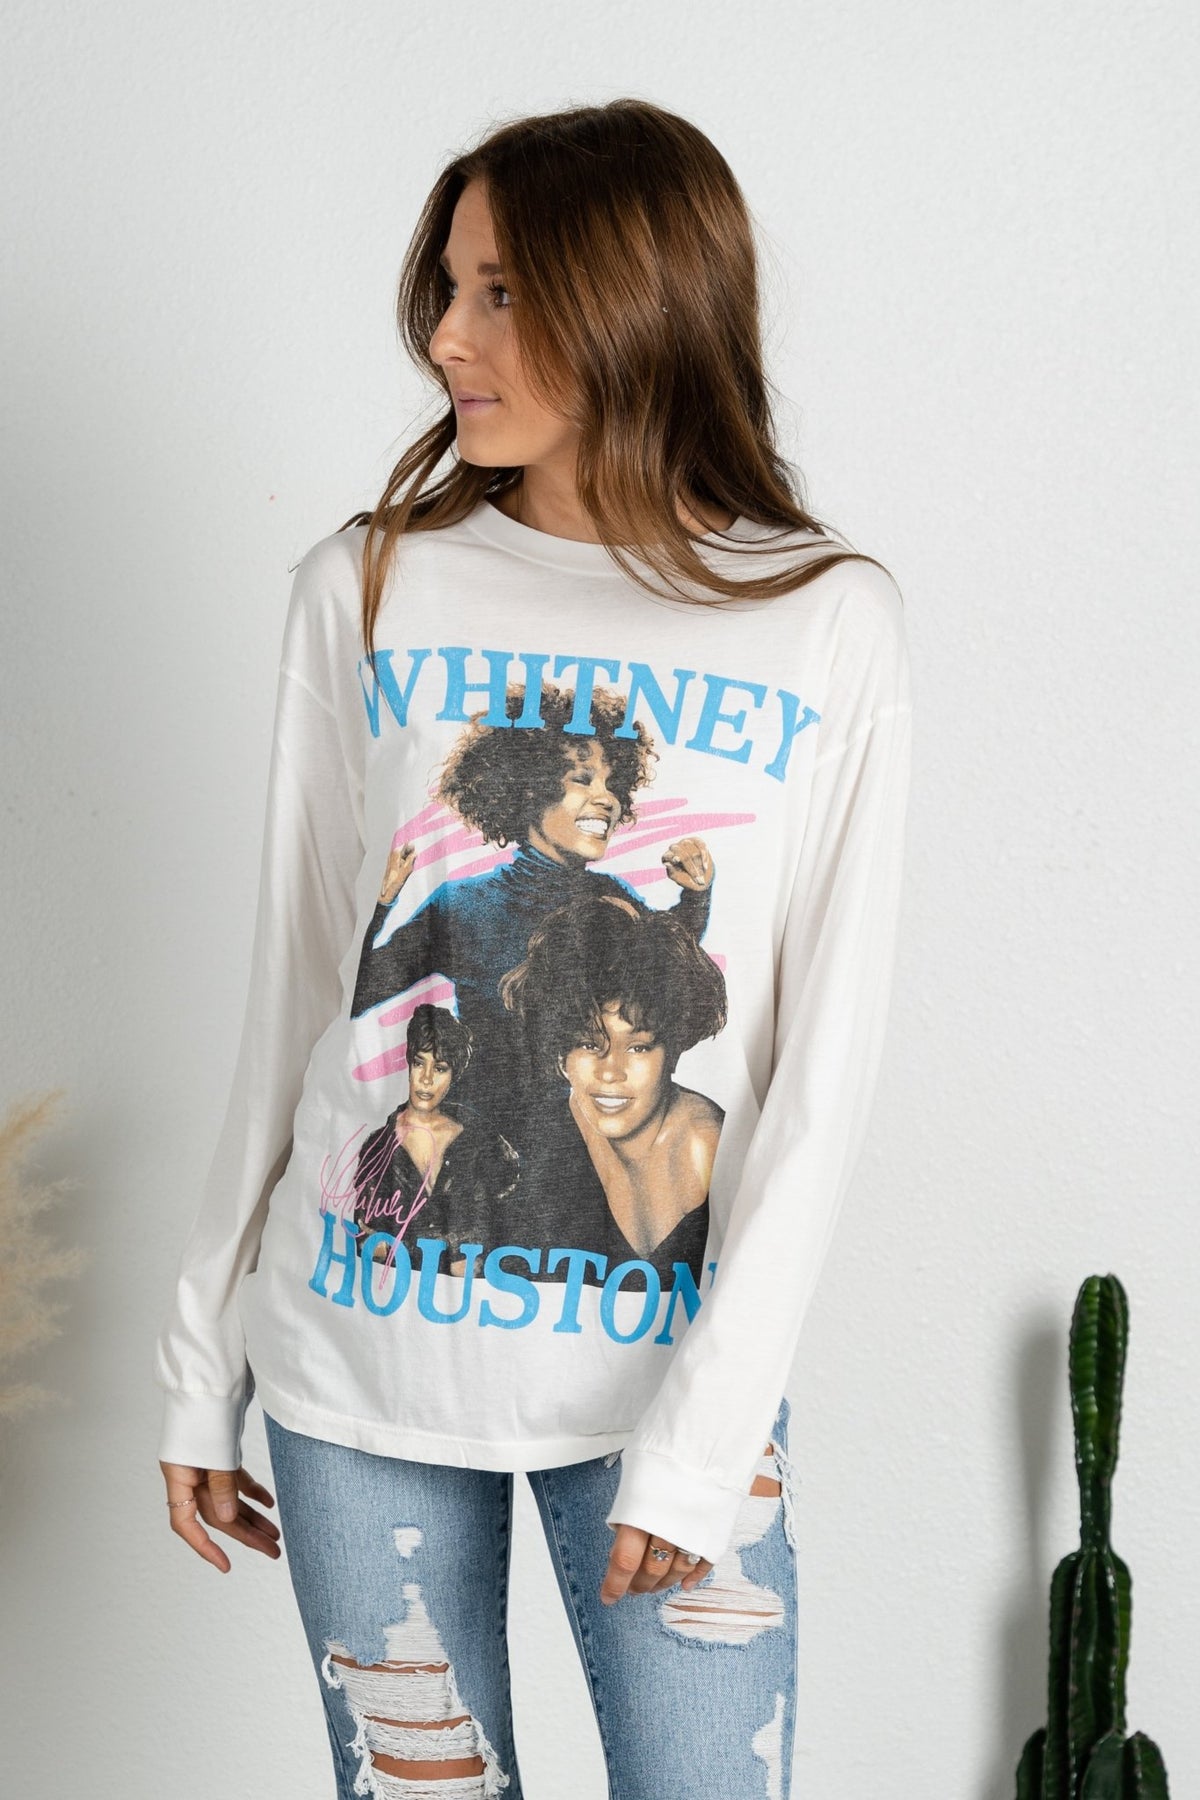 DayDreamer Whitney Houston dance long sleeve tee vintage white - Trendy Band T-Shirts and Sweatshirts at Lush Fashion Lounge Boutique in Oklahoma City